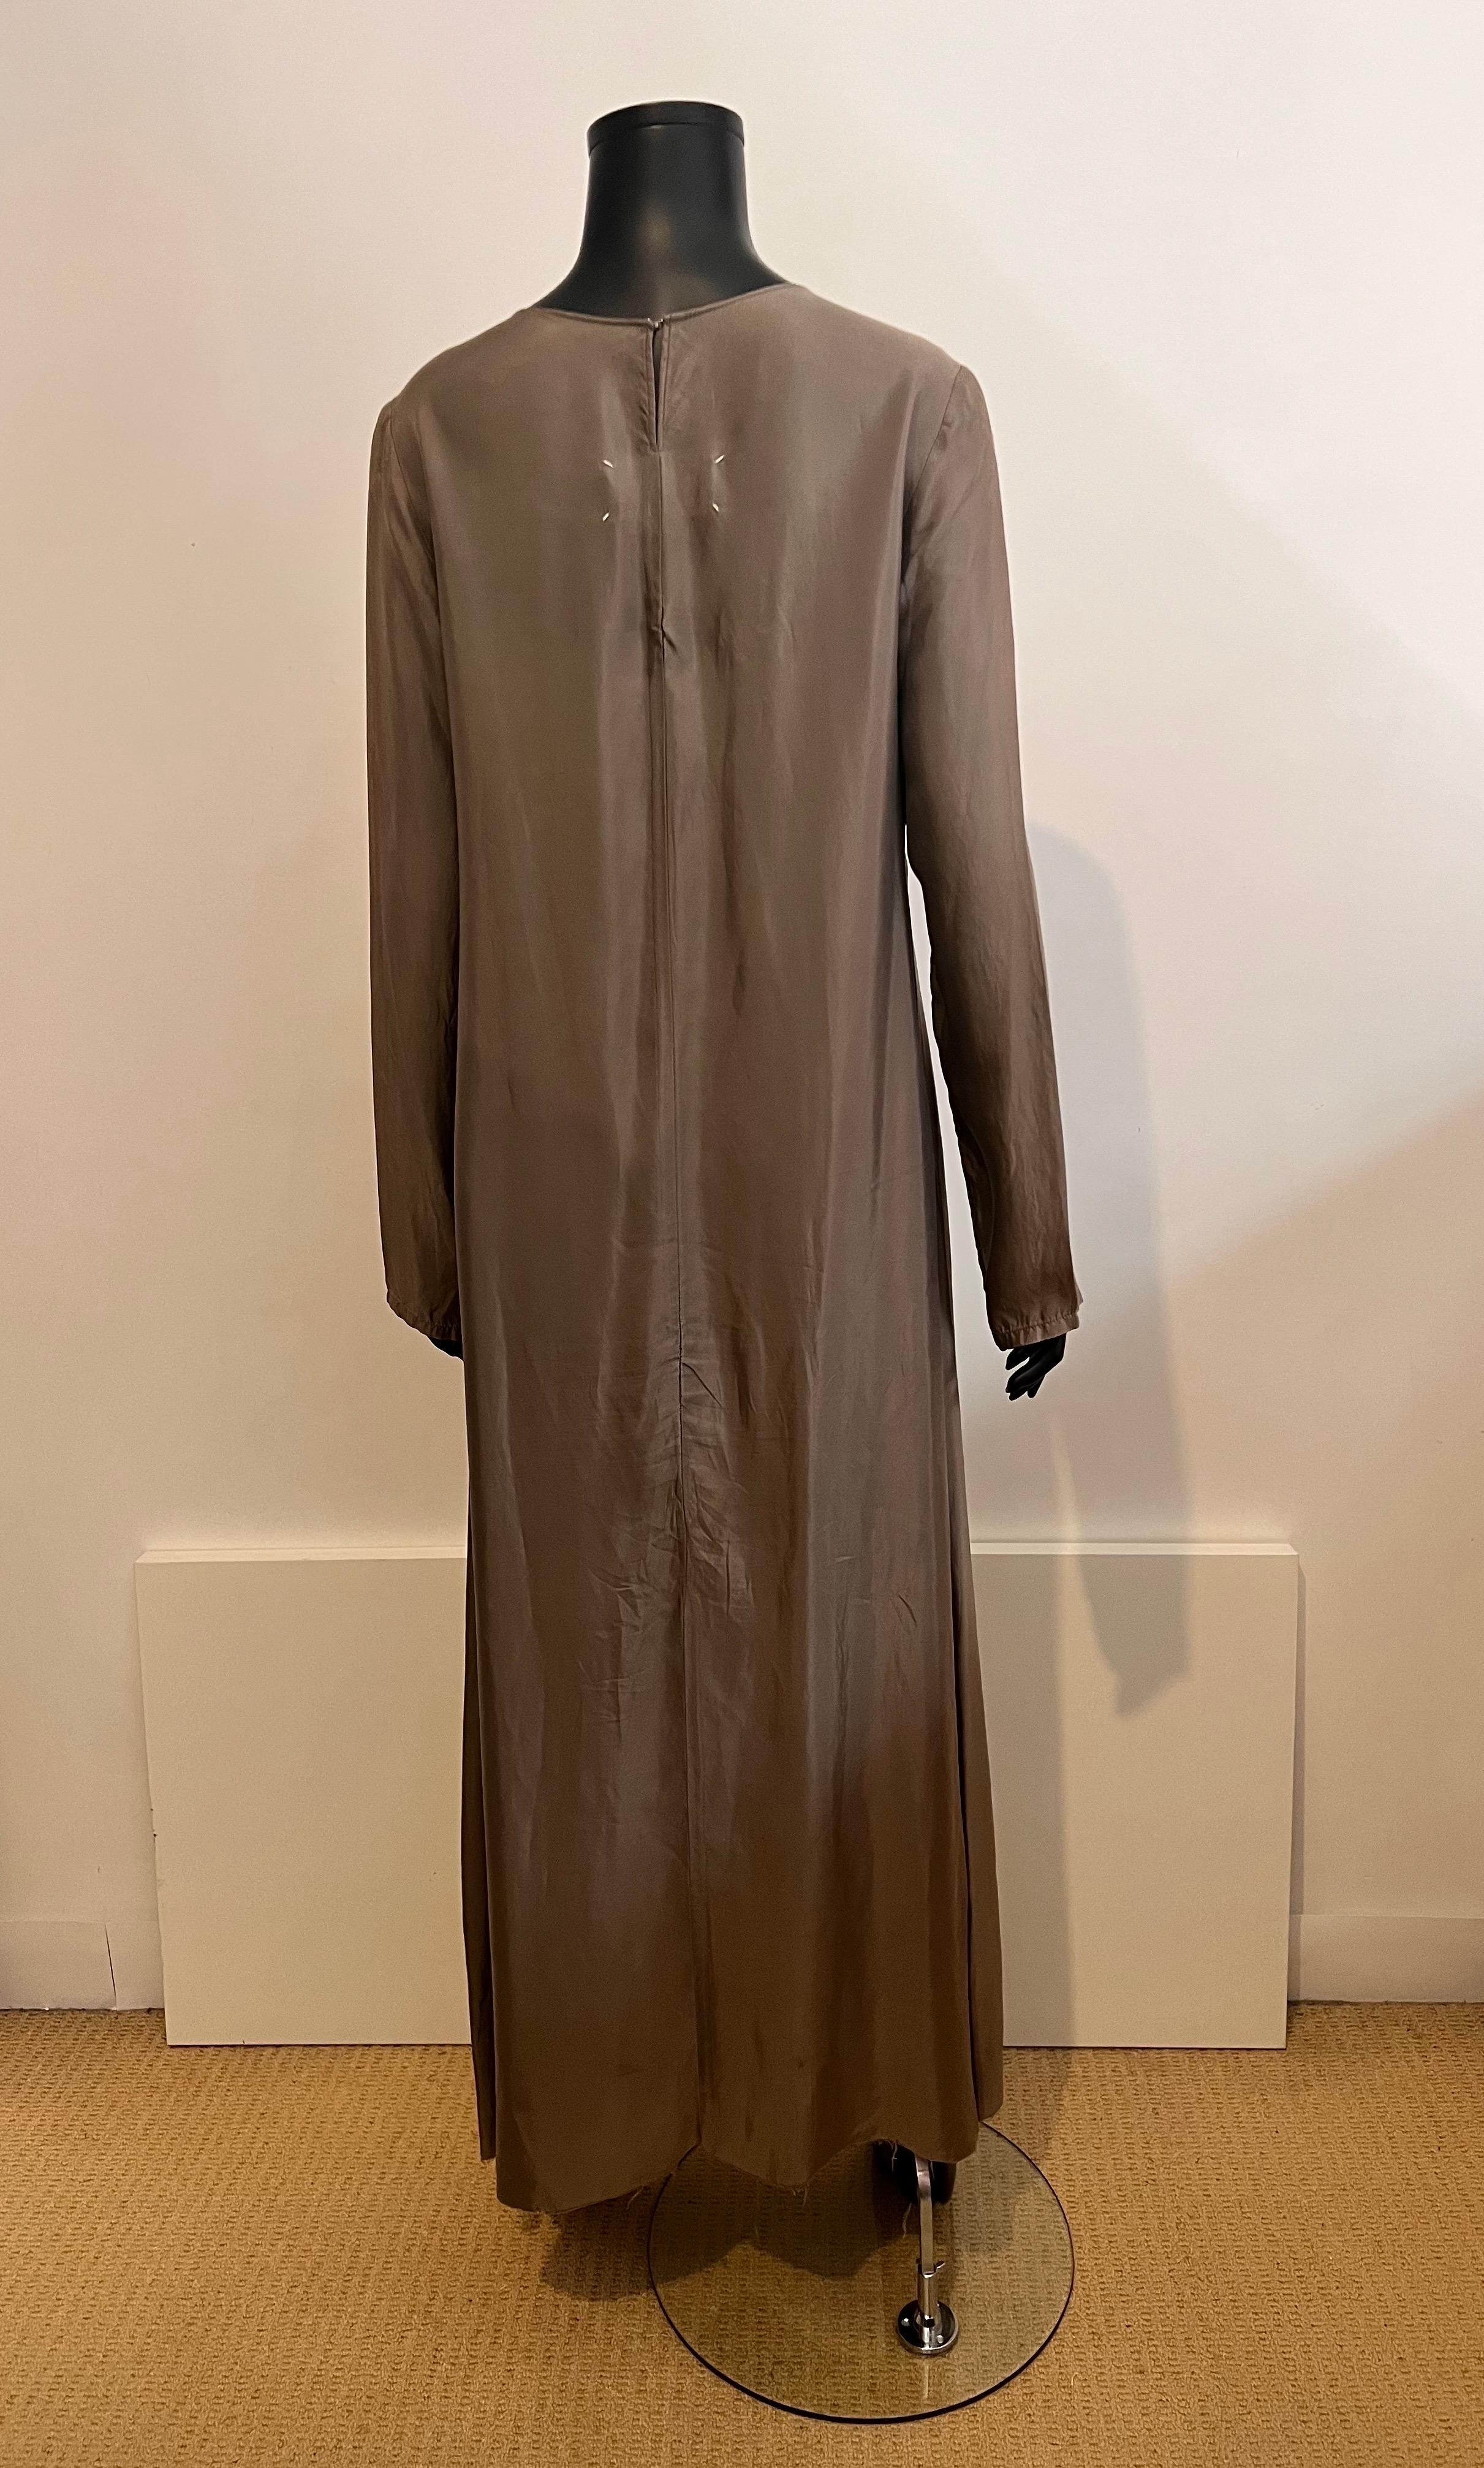 This piece epitomises the deconstructed era of the Margiela house in the 1990’s.

A maxi length, A line shaped dress in a signature colour for the house (taupe/olive) with grey felt patches worked /added randomly over the garment creates a piece